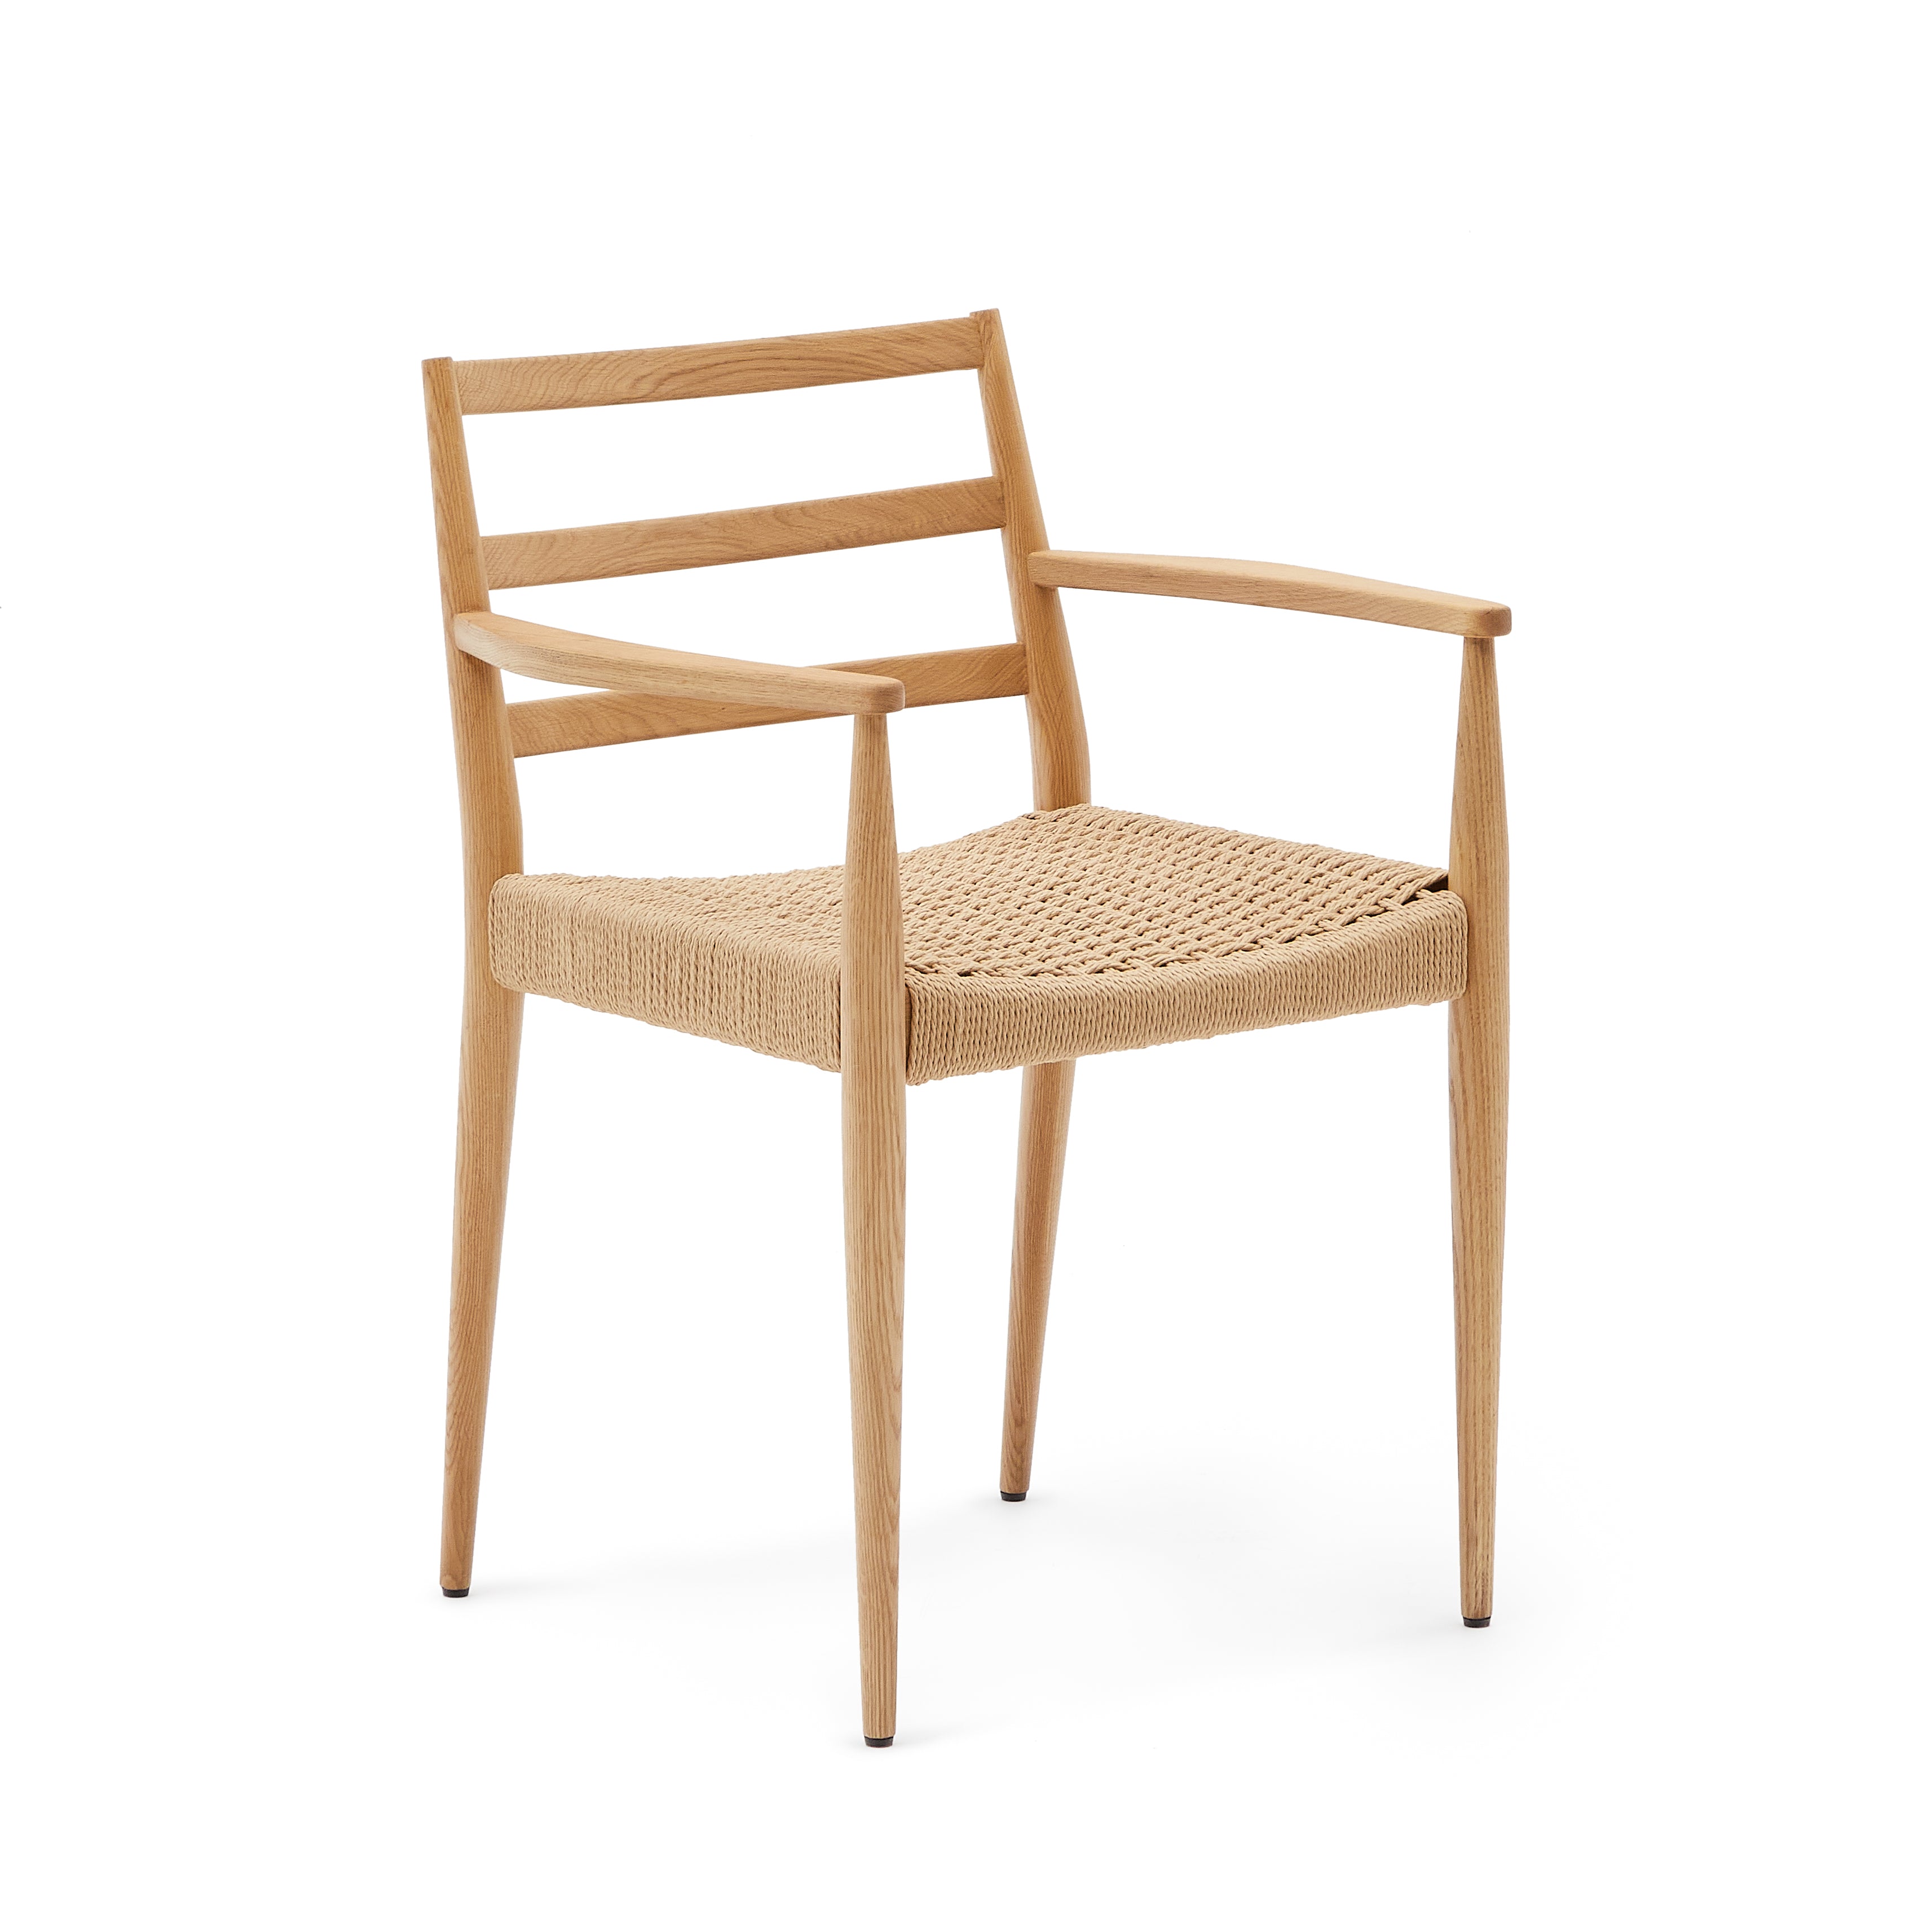 Analy chair with armrests, solid oak, 100% FSC natural finish and rope seat